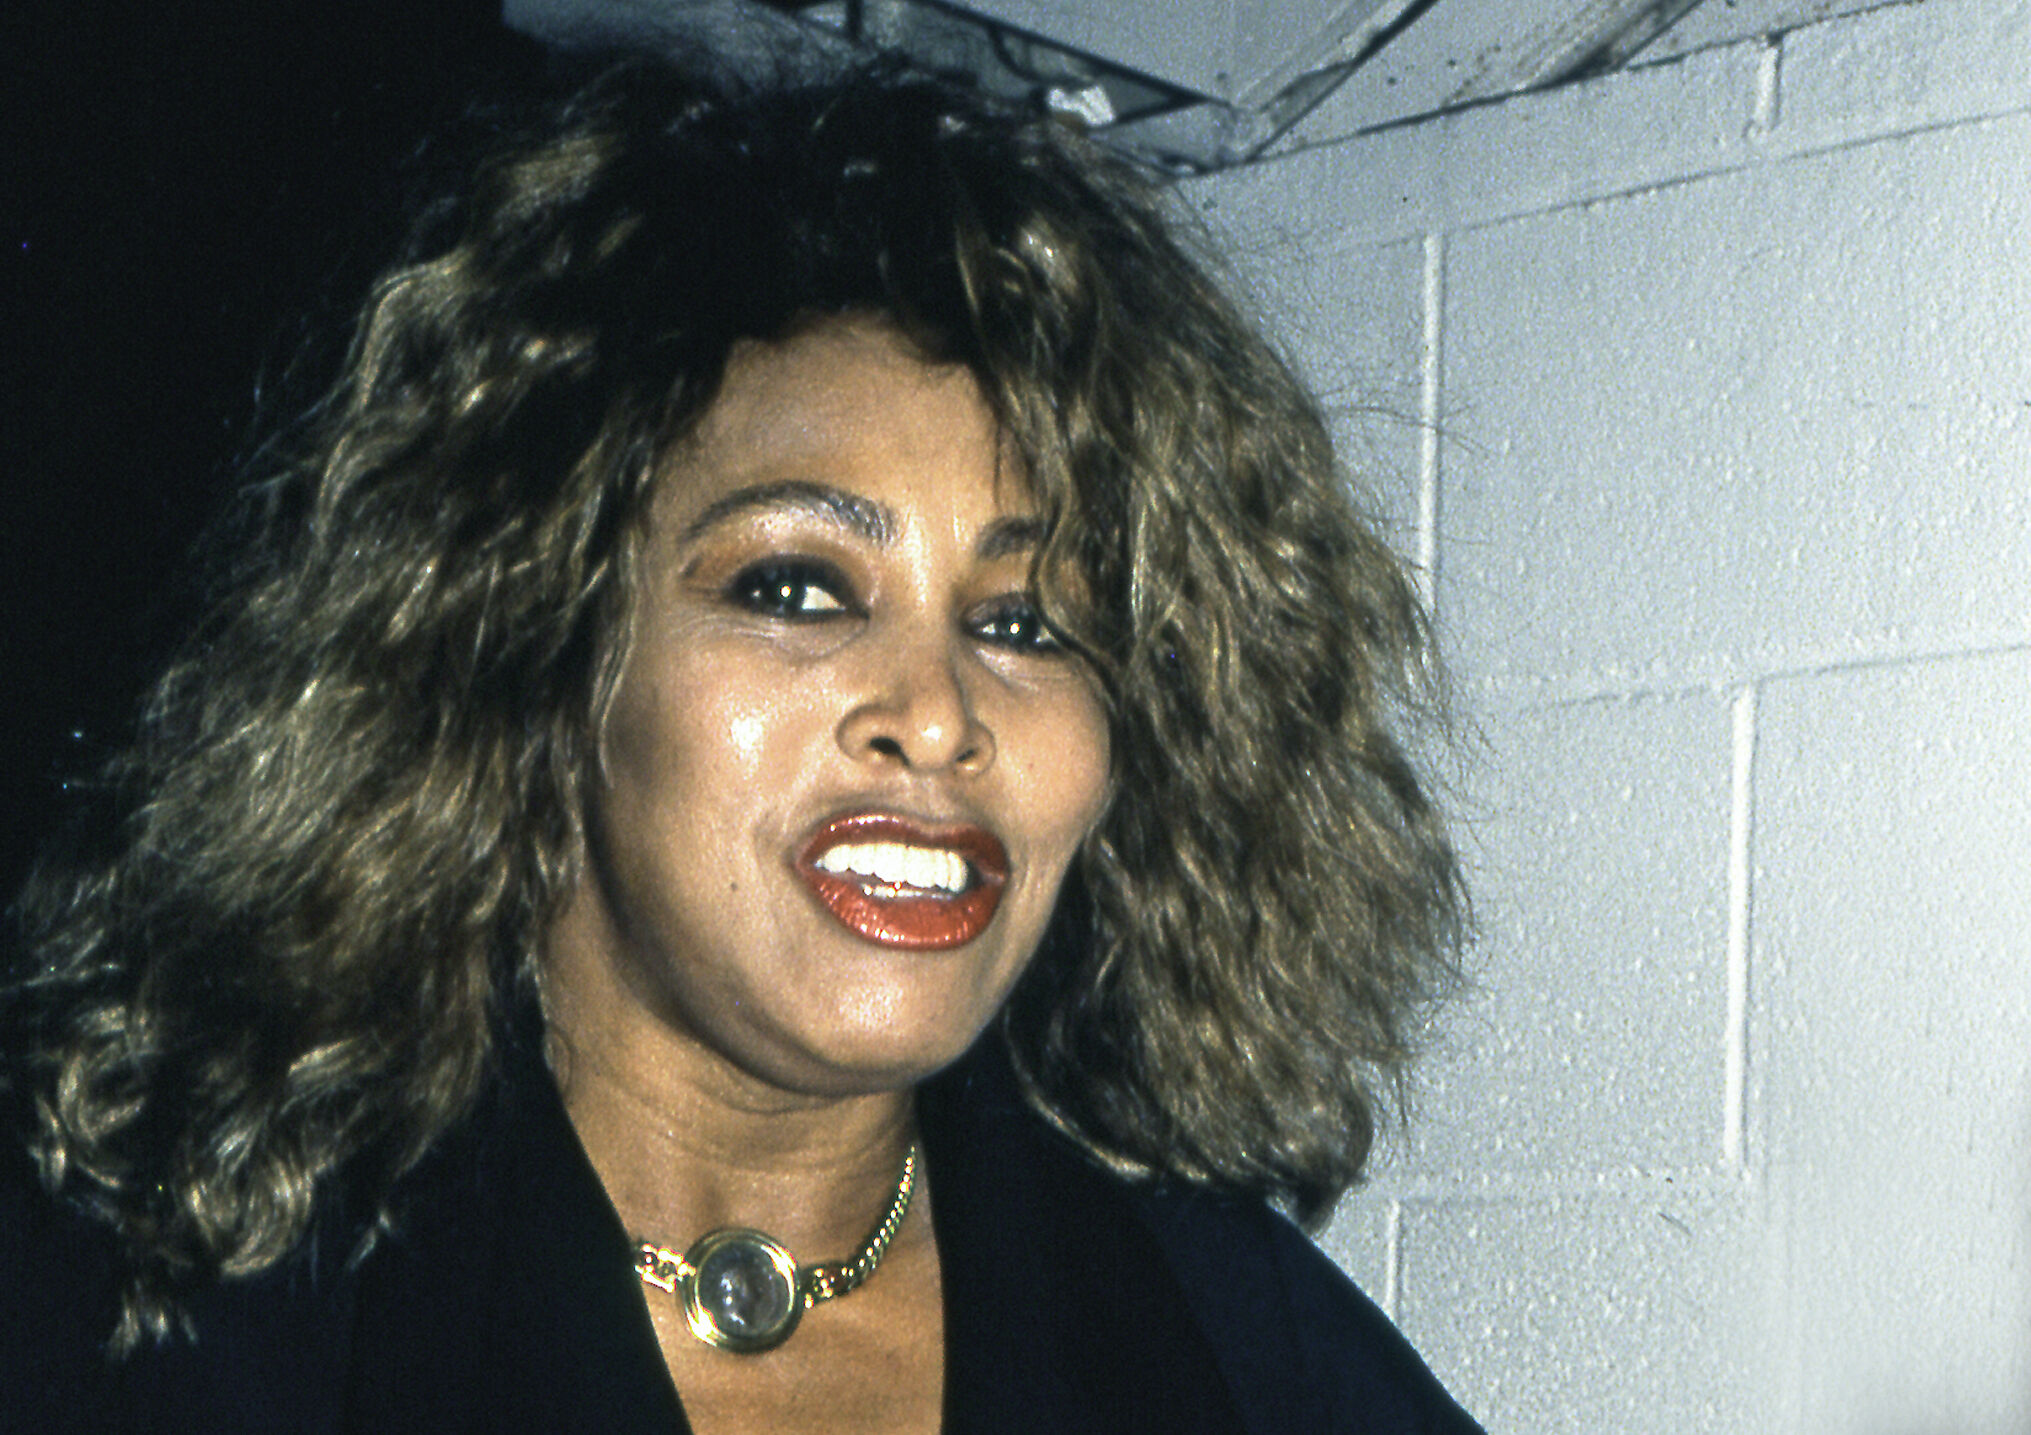 Los Angeles, California - exact date unknown - circa 1991: Singer Tina Turner arriving at a restaurant